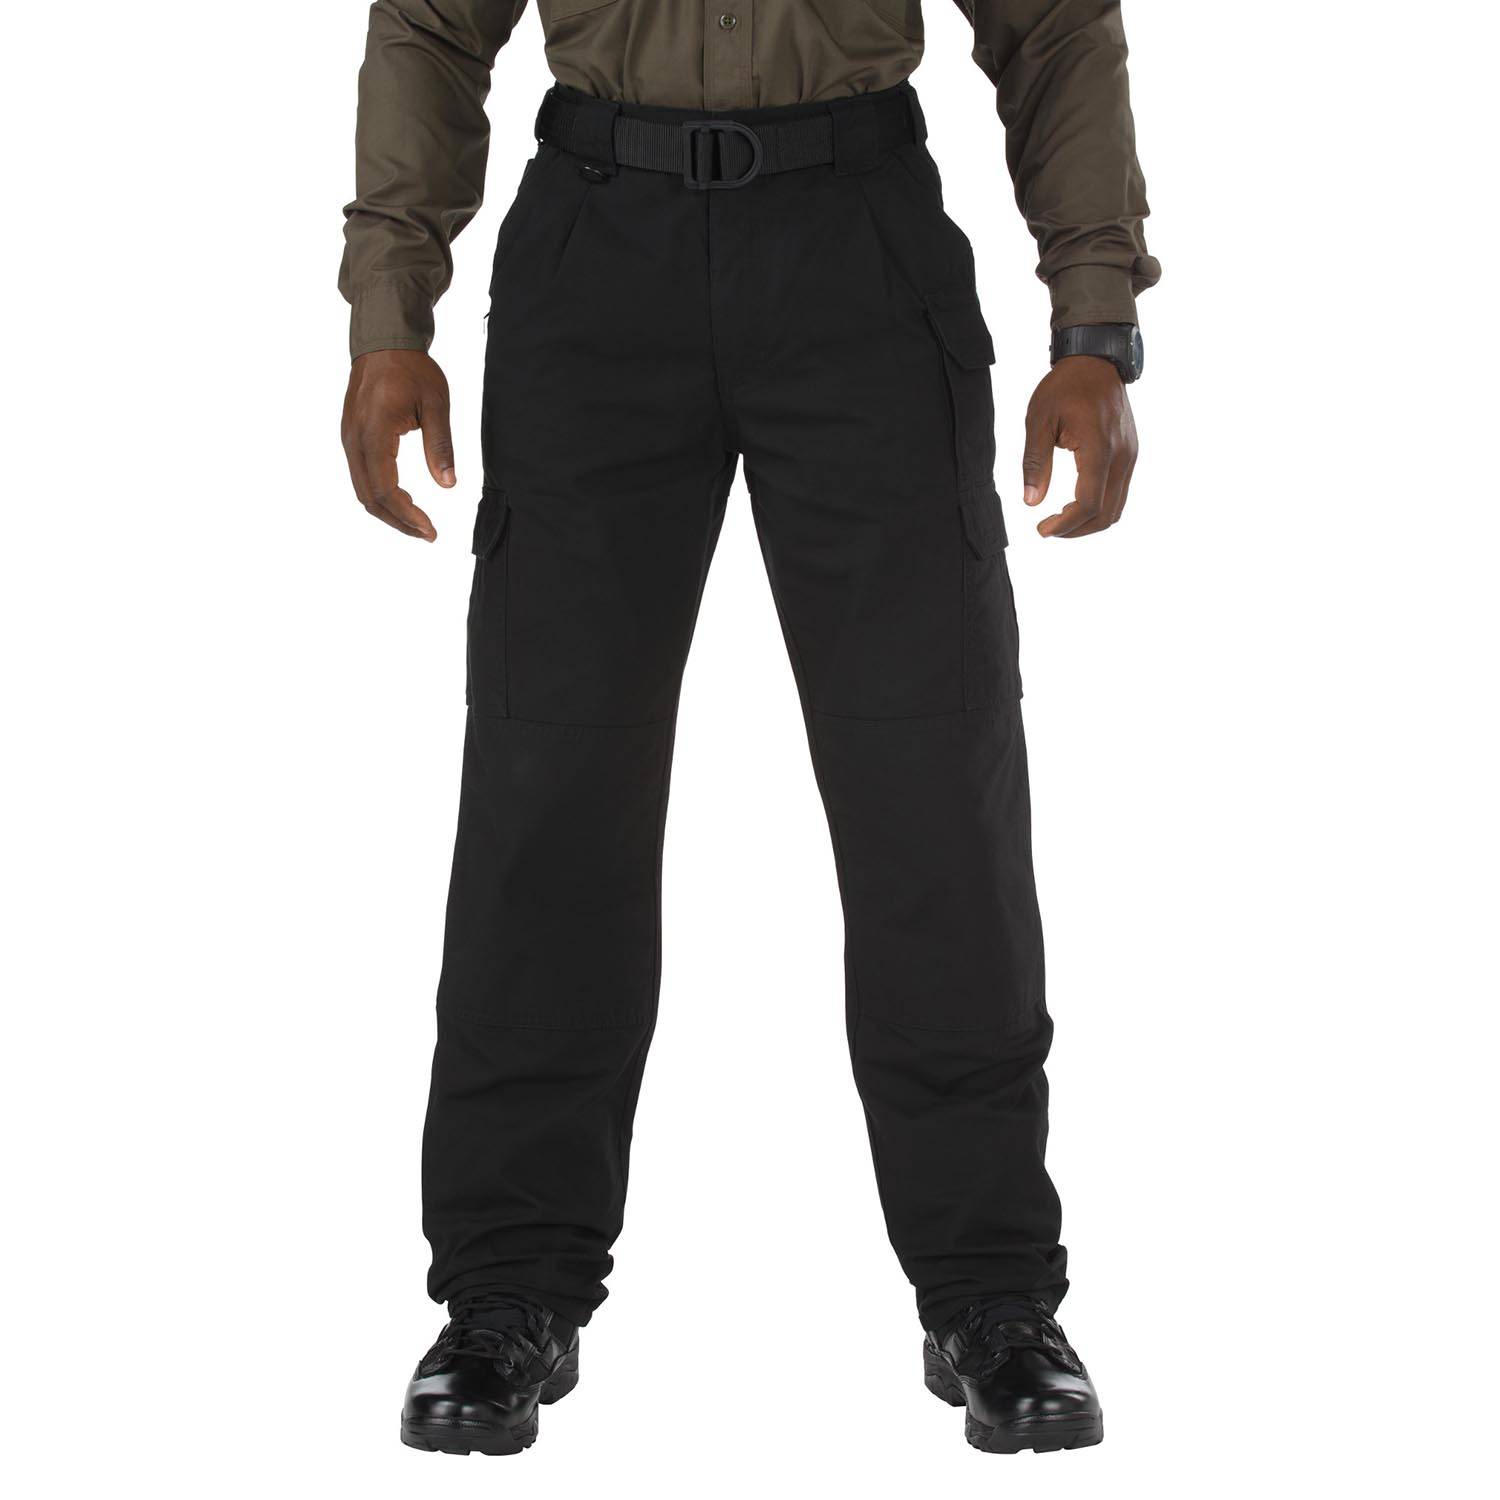 EmersonGear All-weather Outdoor Tactical Pants Duty Cargo Trousers Urban OD  